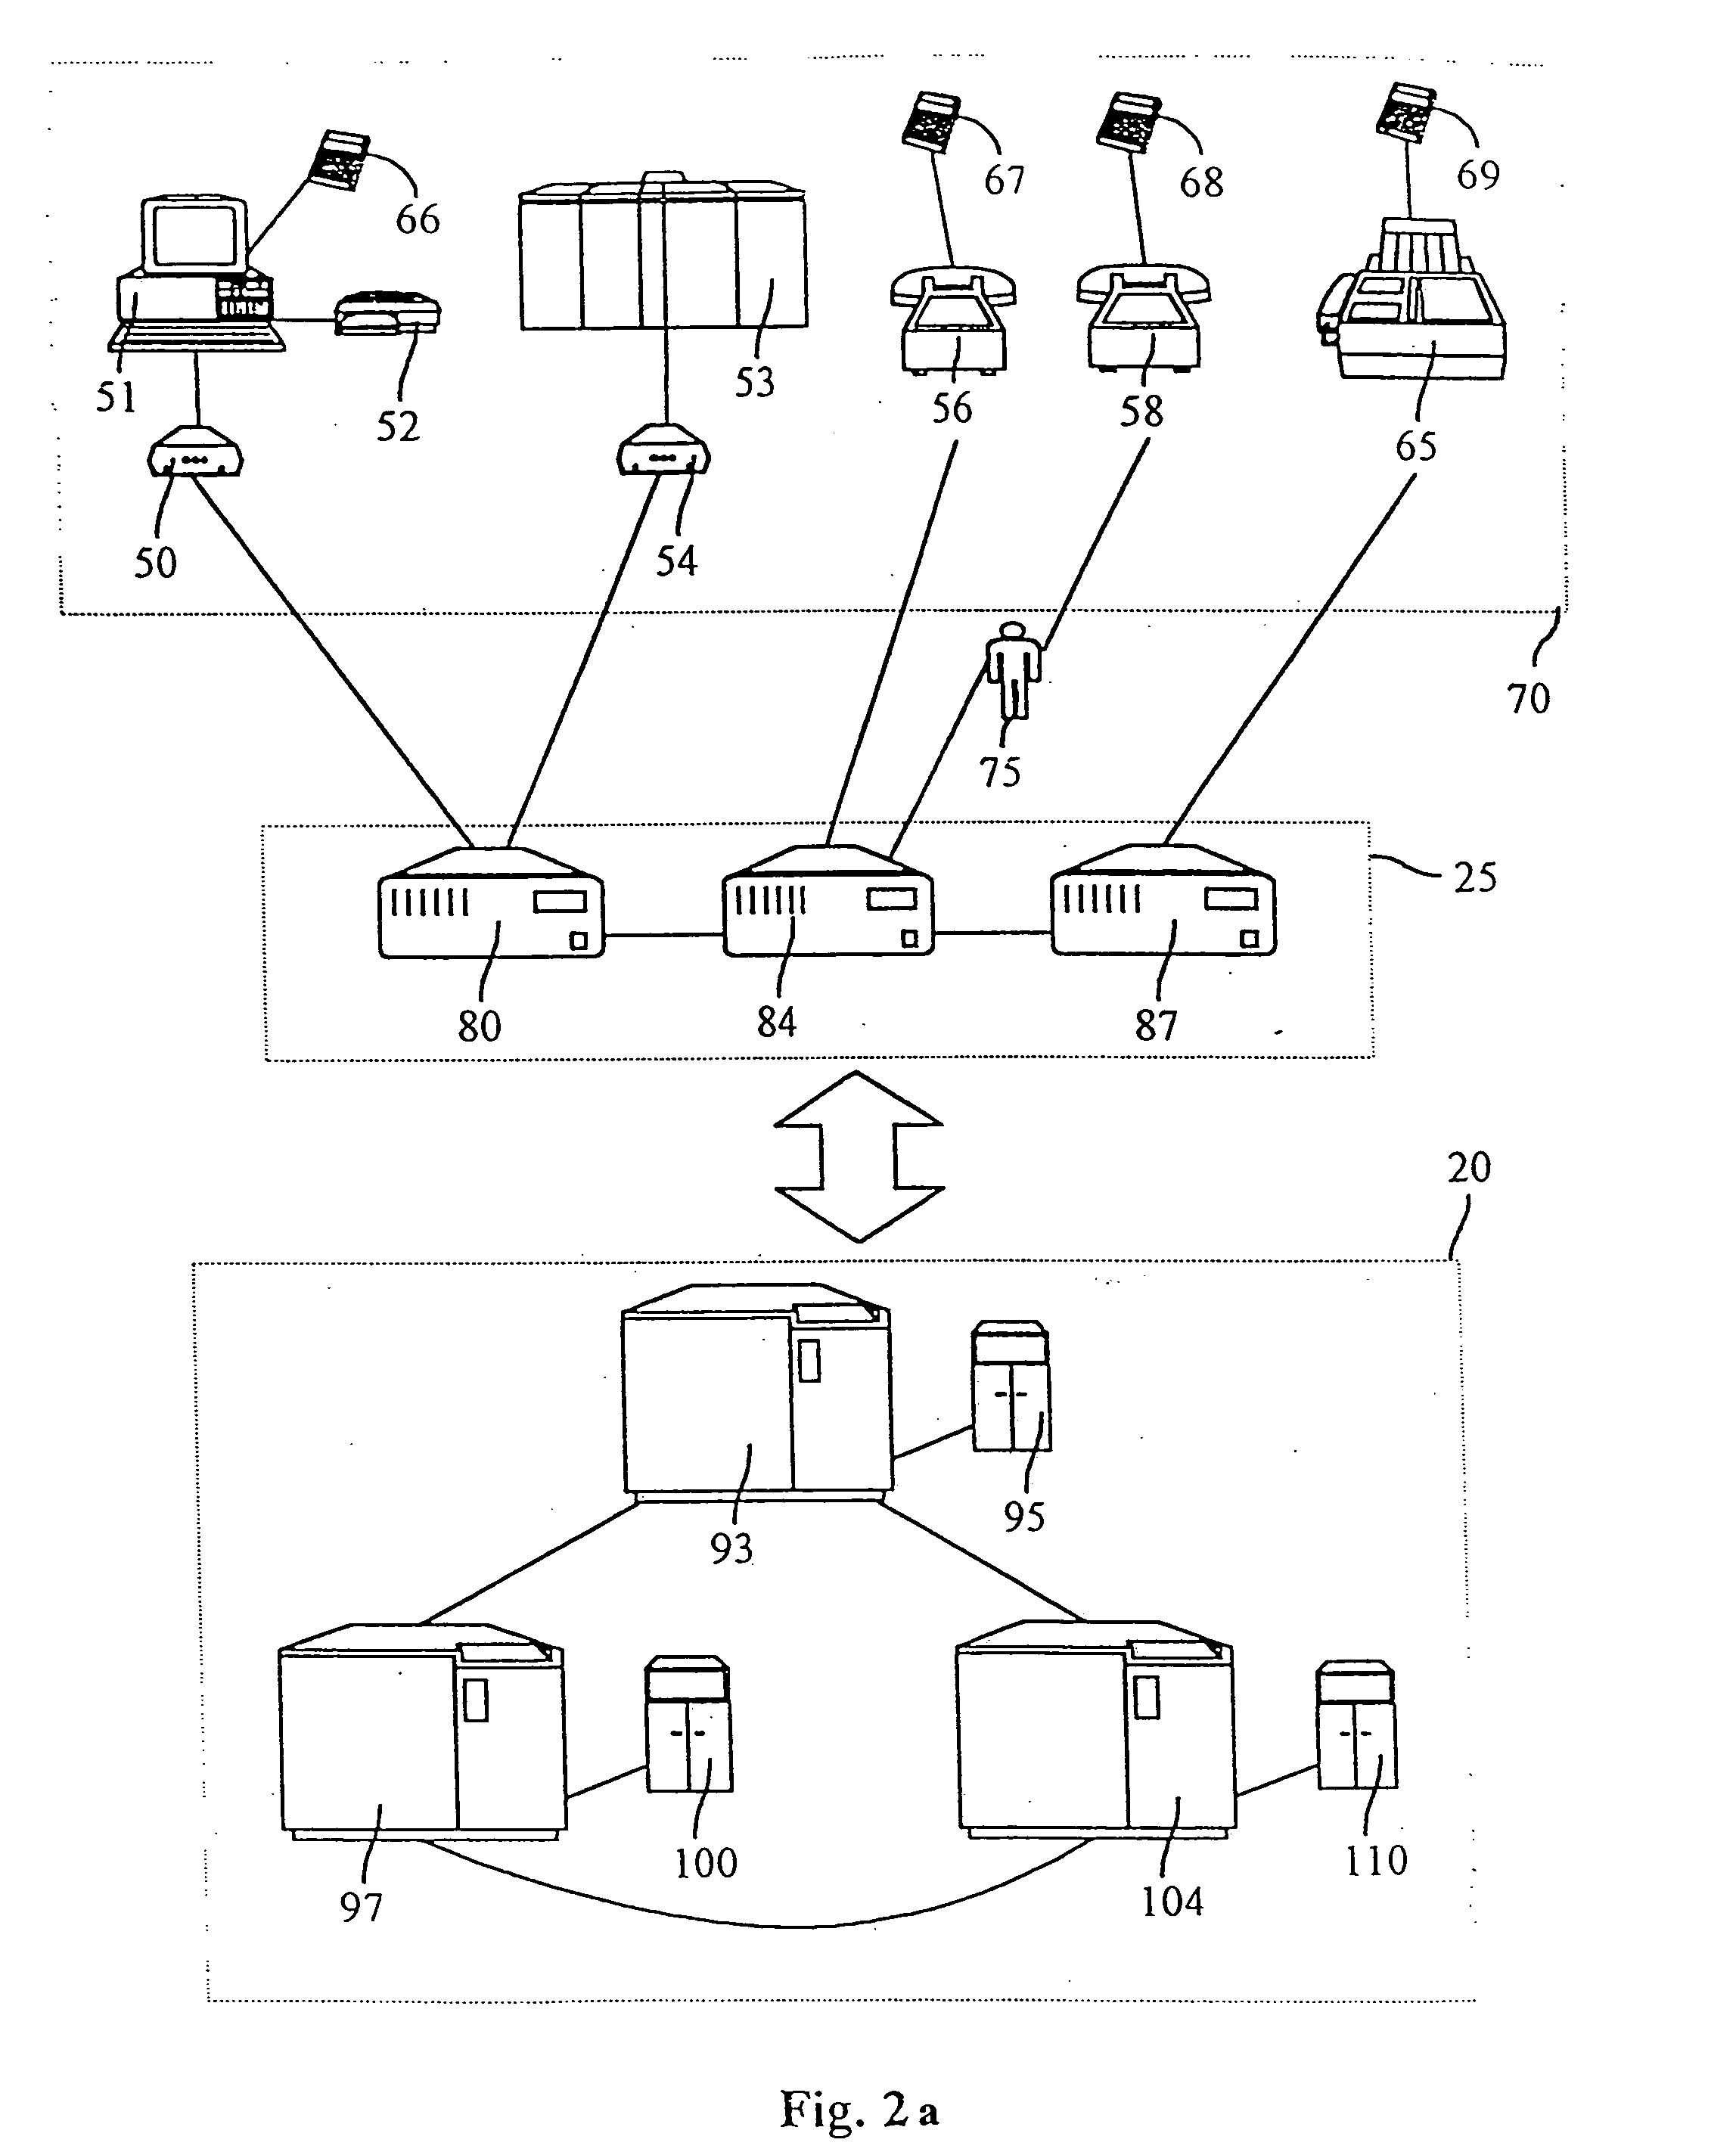 Methods and apparatus relating to the formulation and trading of risk management contracts